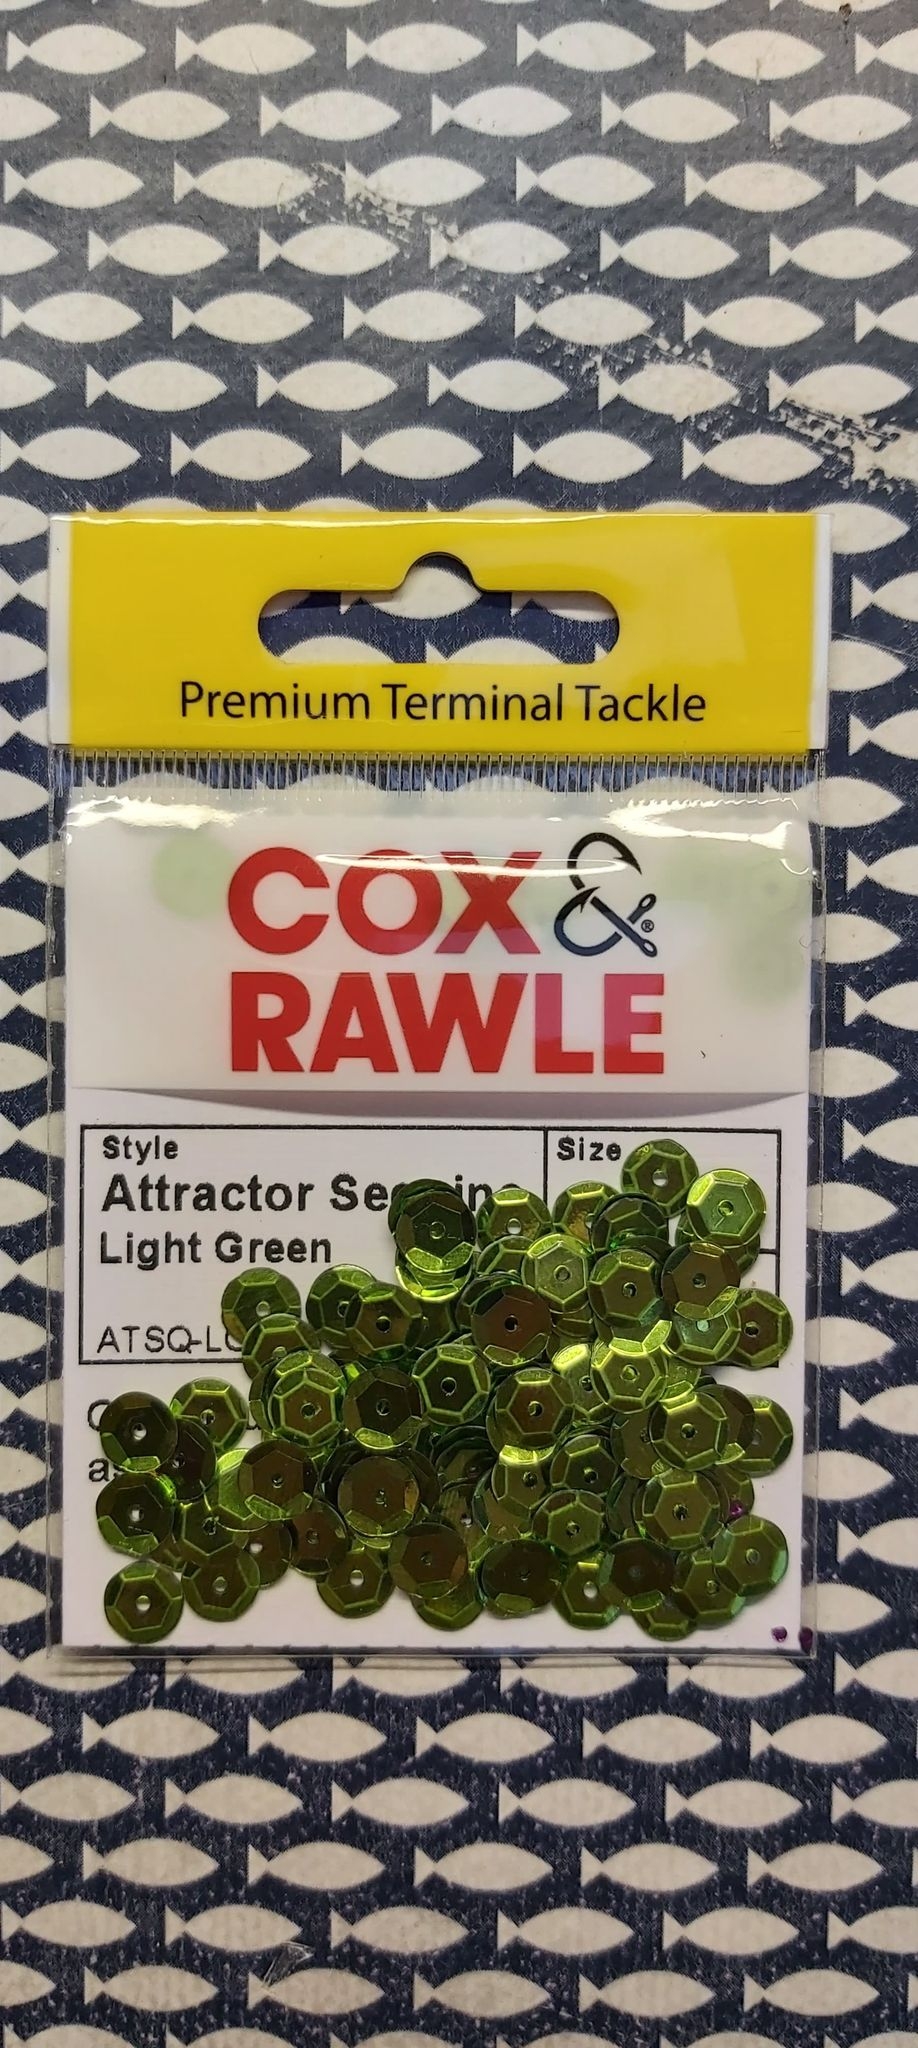 Cox & Rawle 6mm Sequins in packs of 100 – Light Green